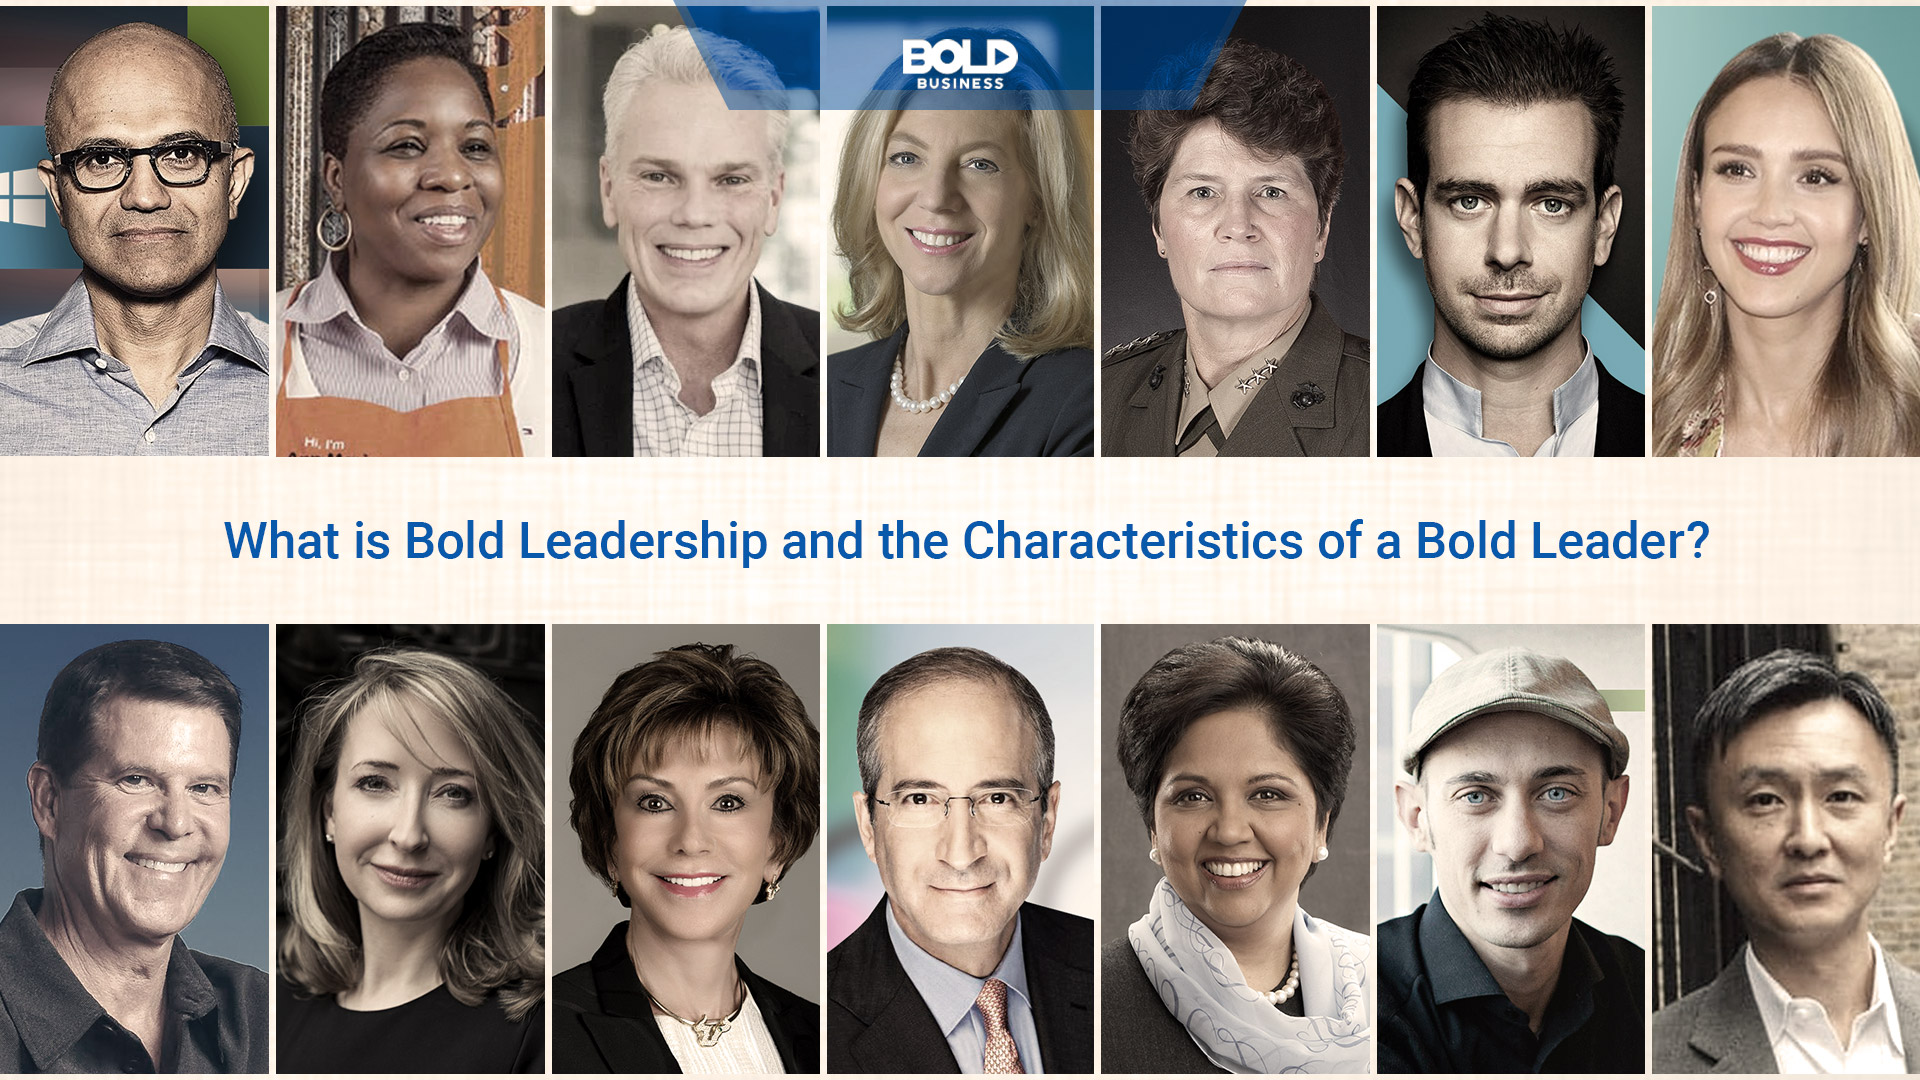 Pictures of leaders that represent What does it mean to be a Bold Leader